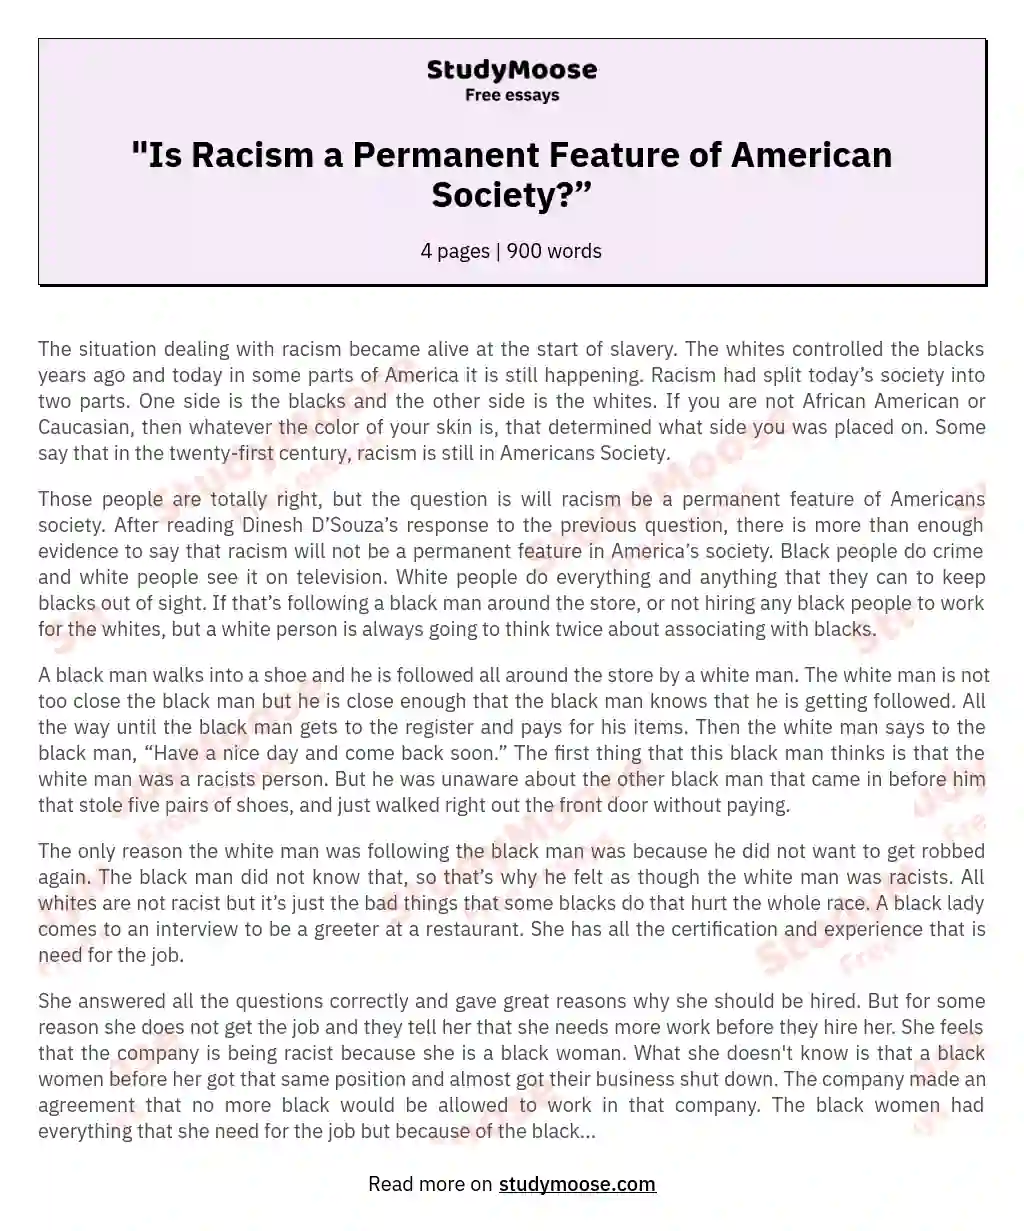 "Is Racism a Permanent Feature of American Society?”